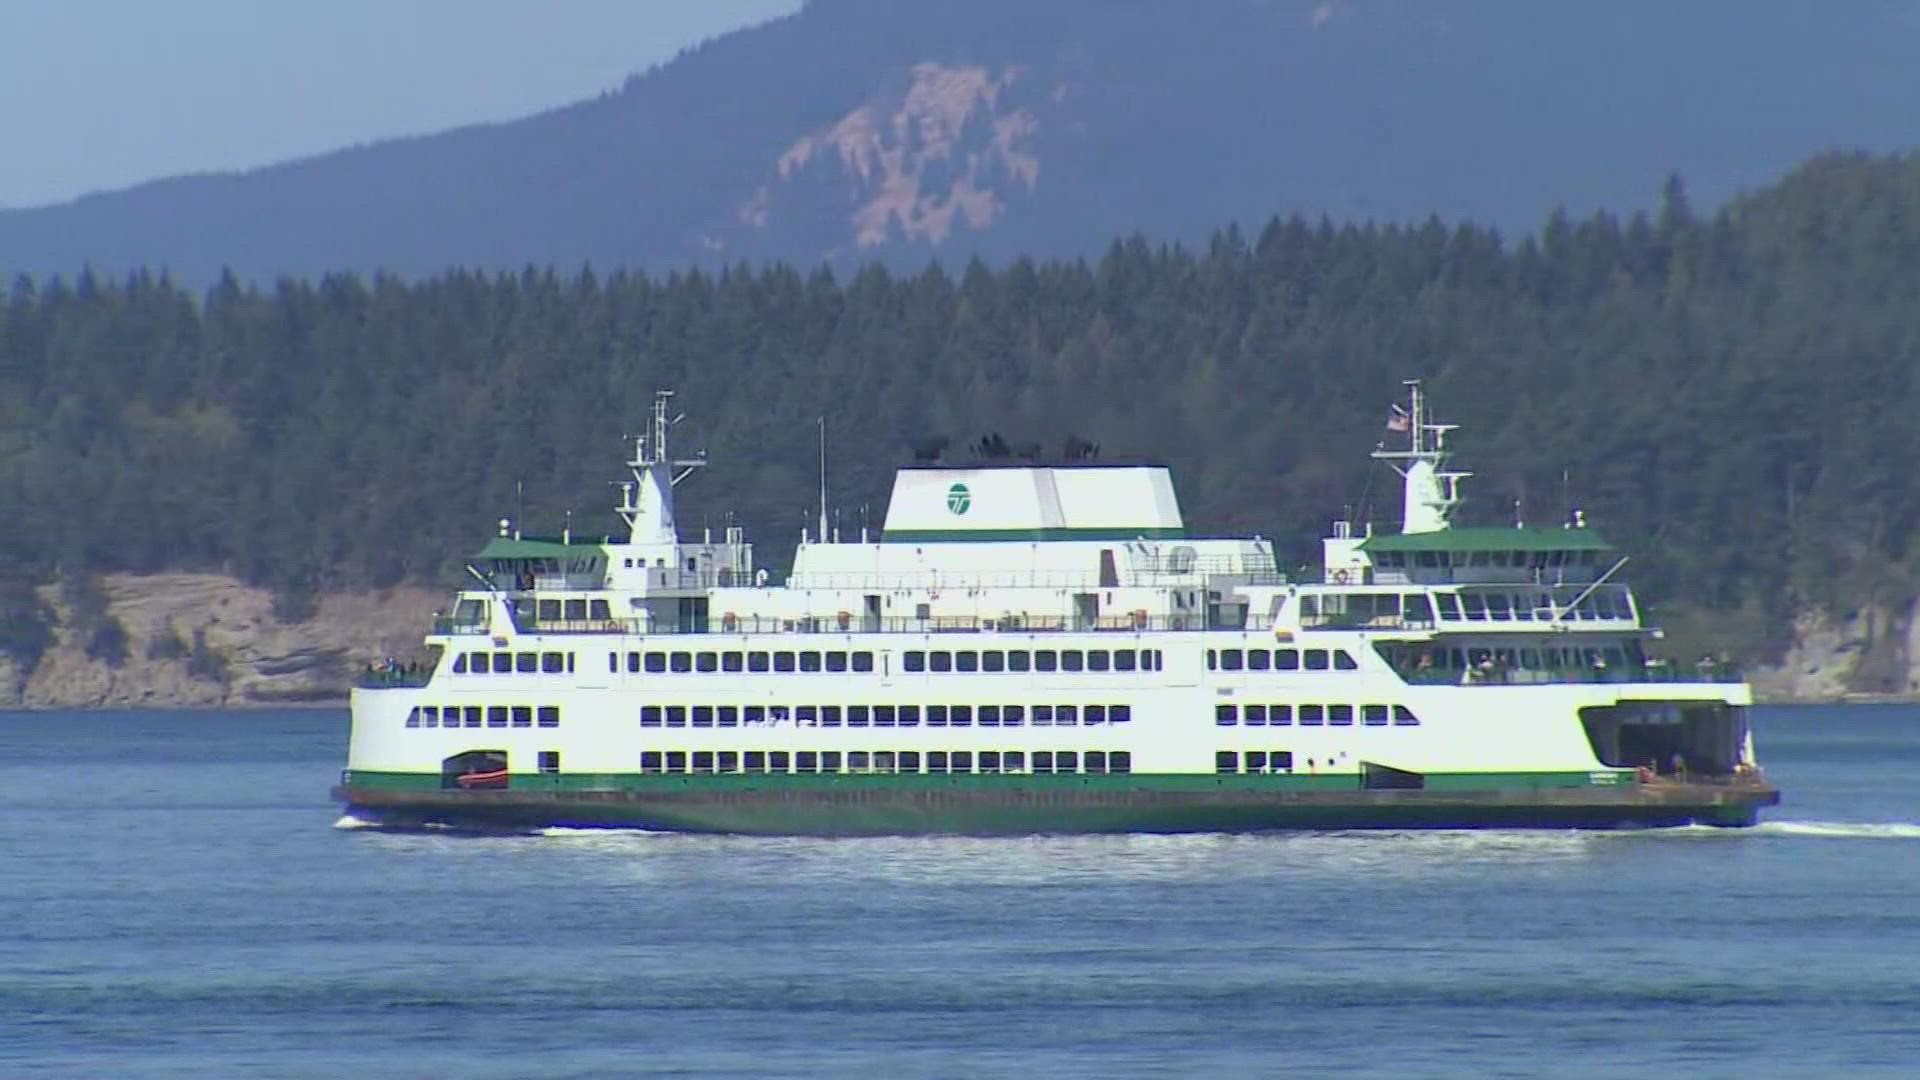 A March 8 report from the ferry system states staff shortages are "unprecedented" in the ferry system's 70-year history.